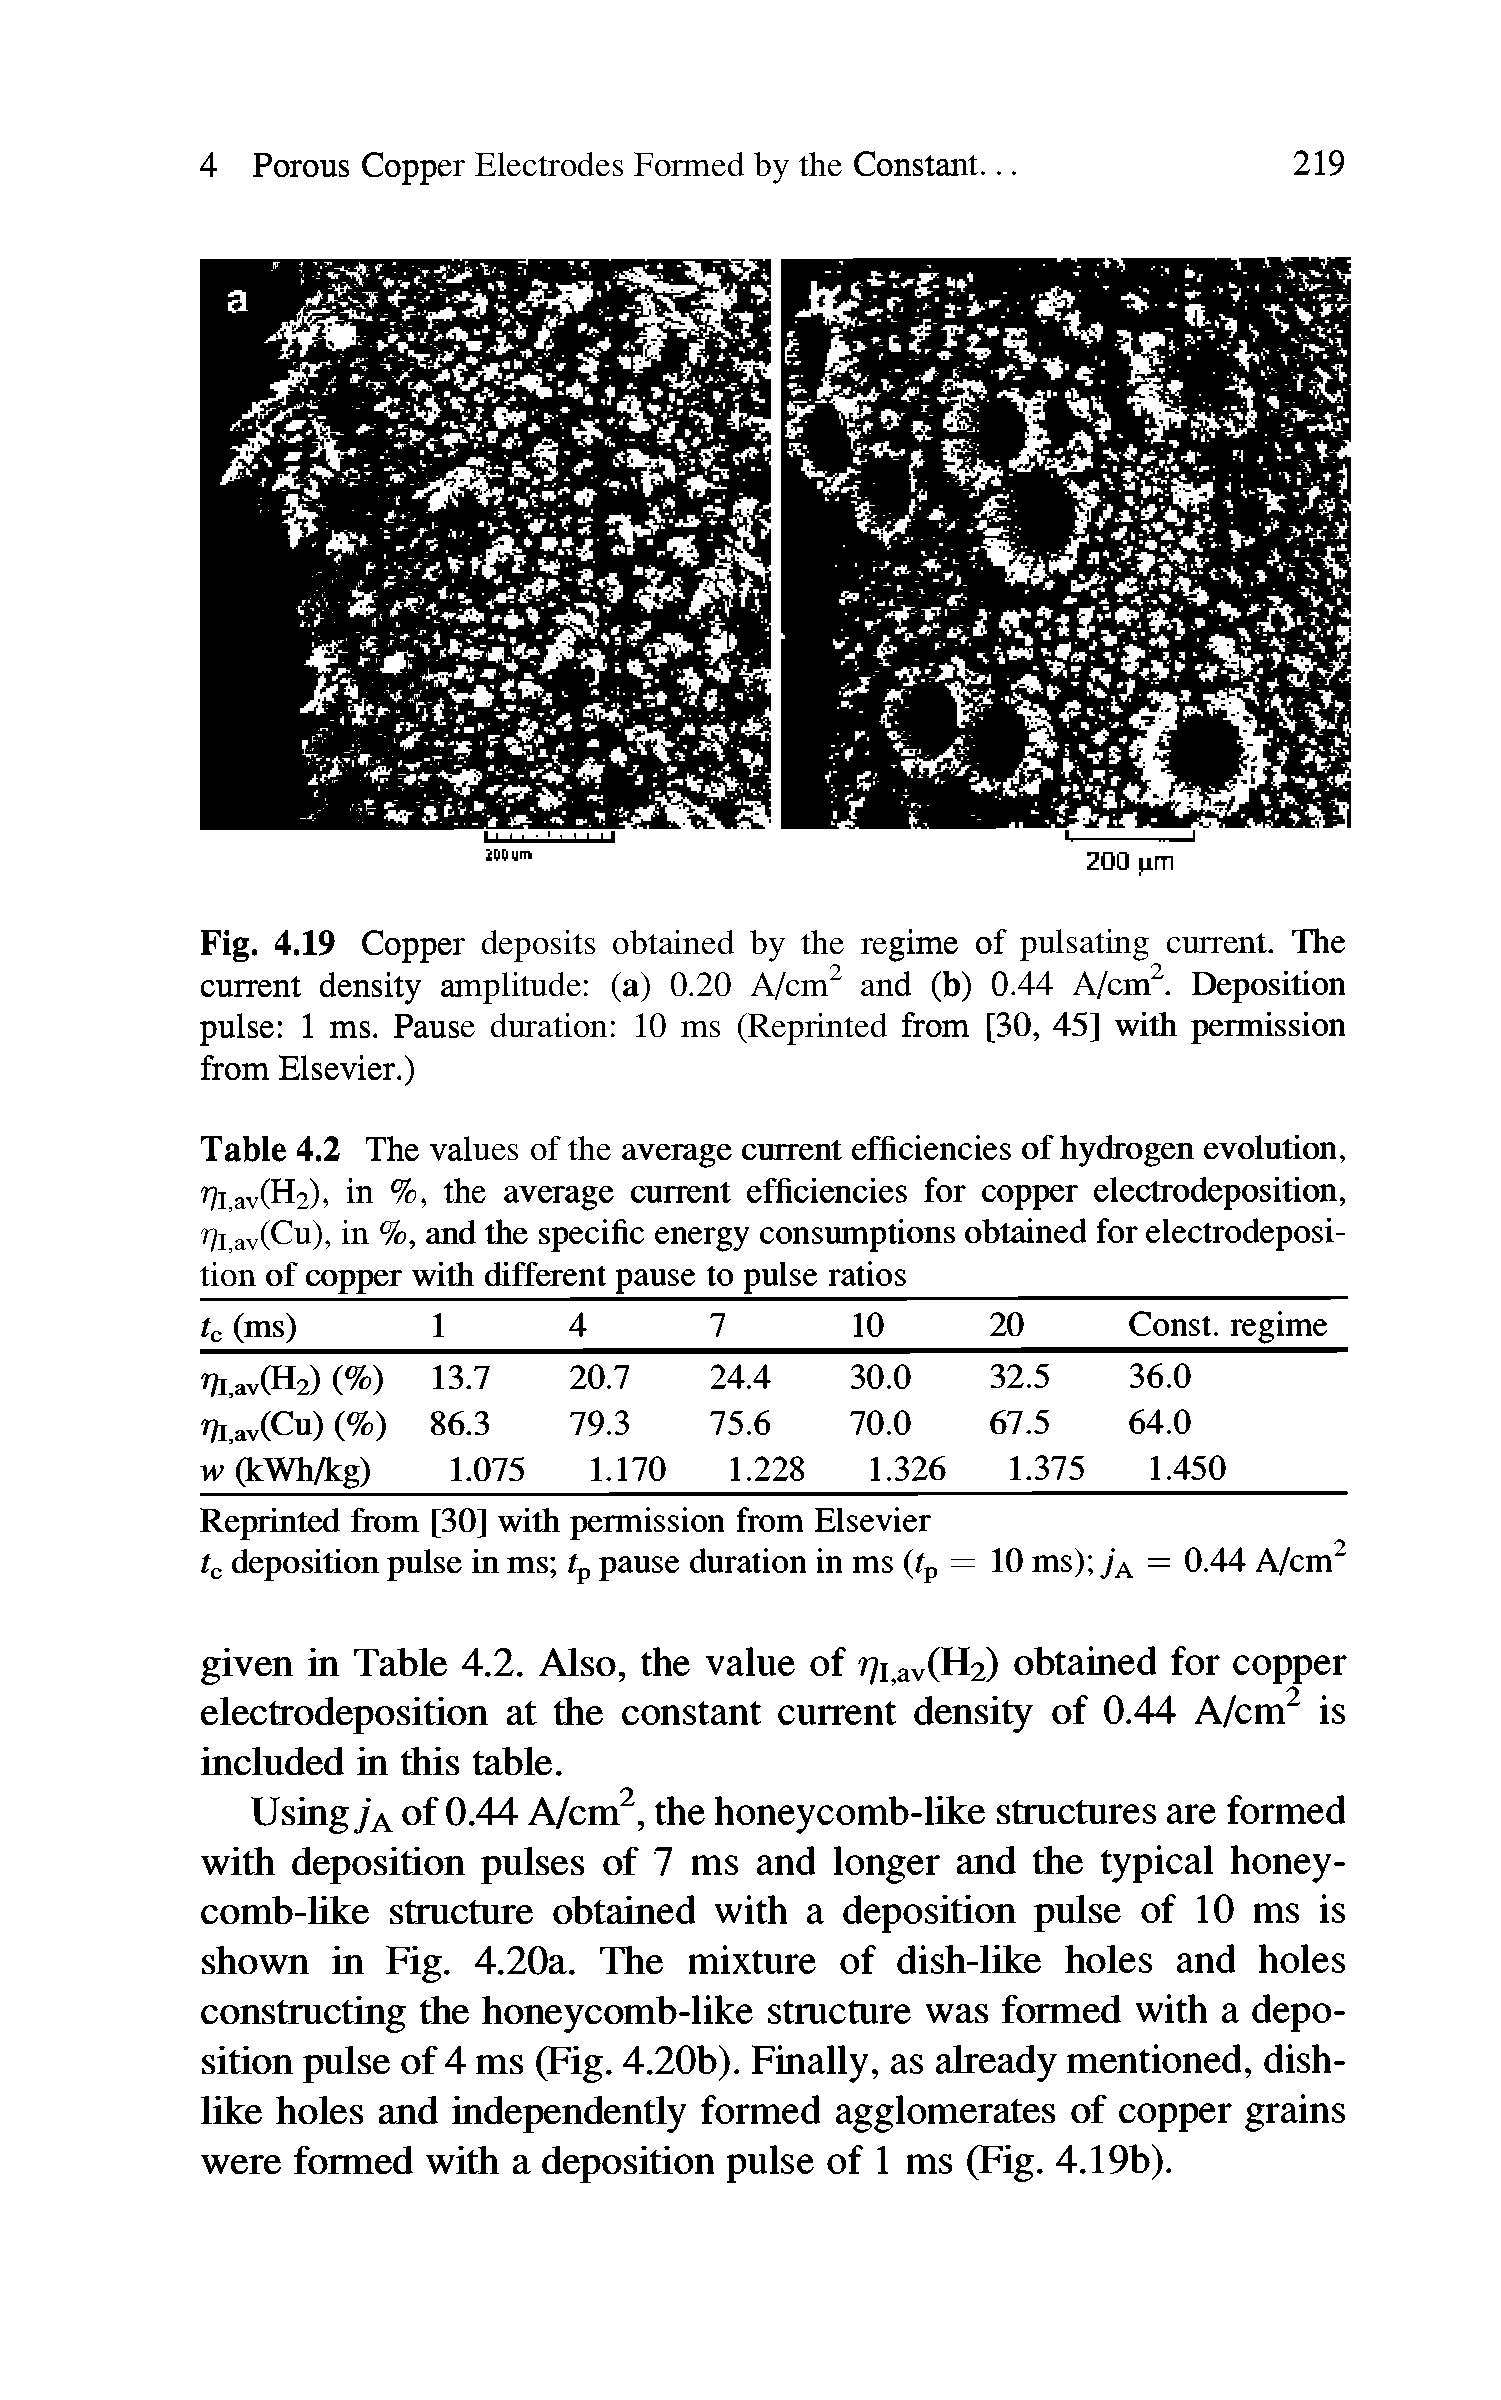 Fig. 4.19 Copper deposits obtained by the regime of pulsating current. The current density amplitude (a) 0.20 A/cm and (b) 0.44 A/cm. Deposition pulse 1 ms. Pause duration 10 ms (Reprinted from [30, 45] with permission from Elsevier.)...